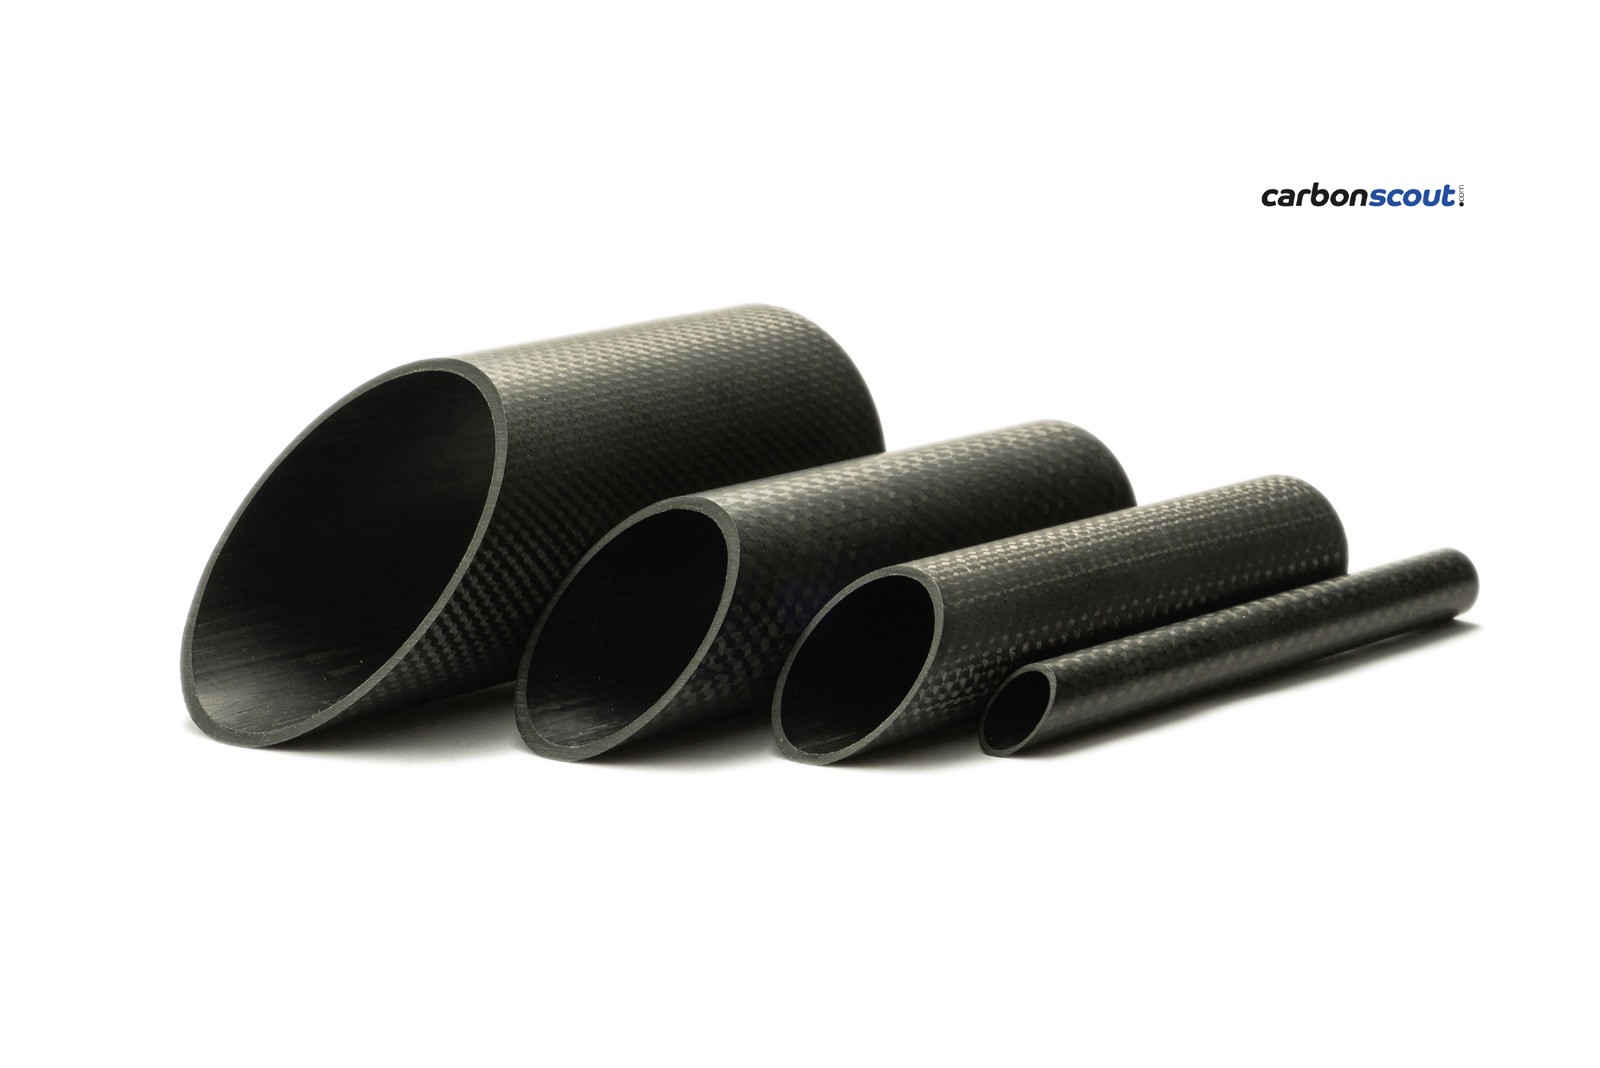 https://www.carbonscout-shop.de/pic/CFRP-carbon-tube-CG-UHP-TUBES-wrapped-42-x-38-x-1000-mm-ground.04238a.jpg